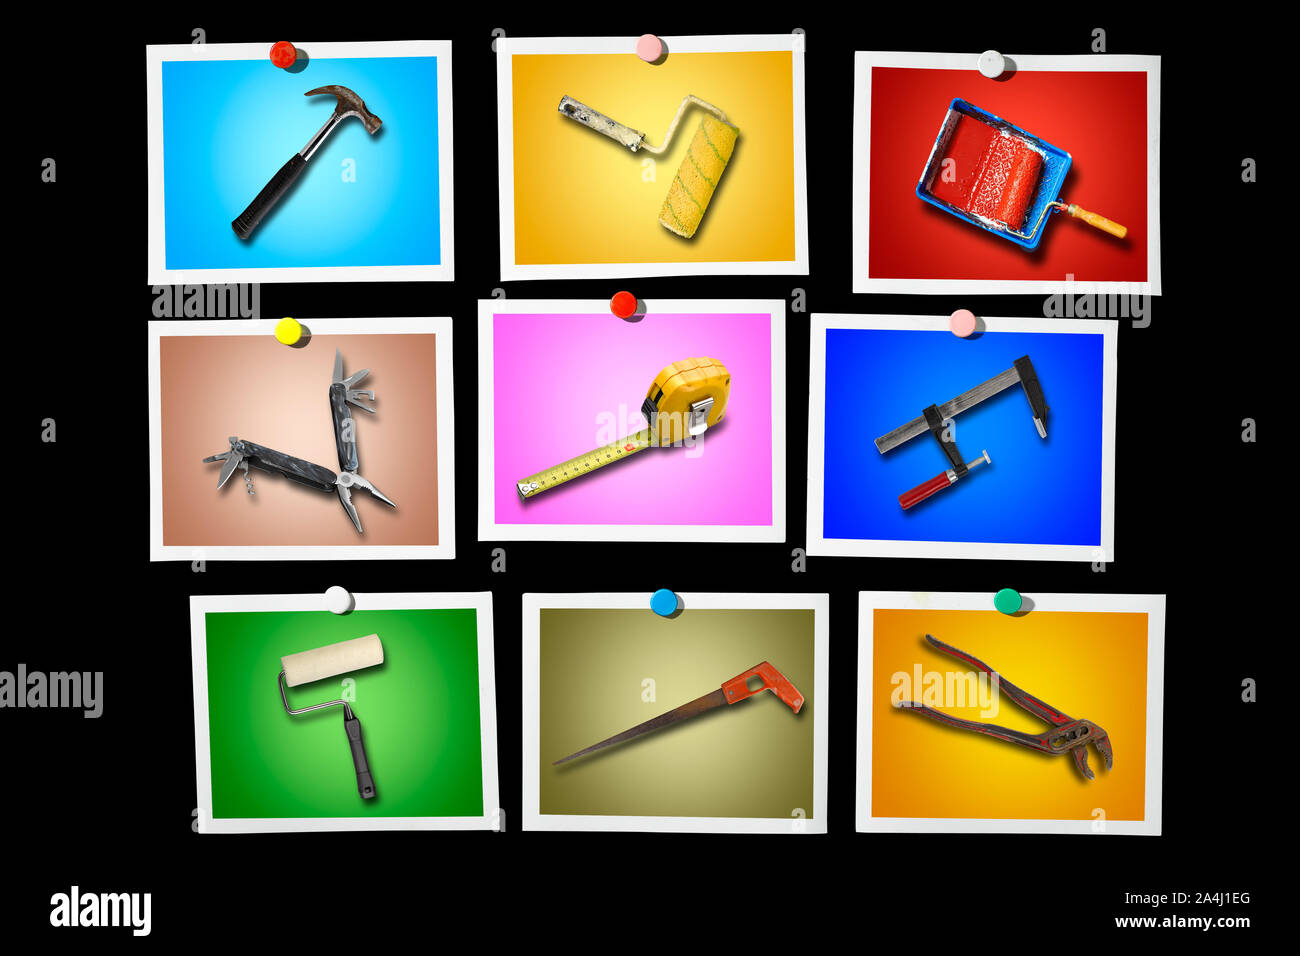 Instant photo on Black background and Set of work tools isolated on colored background Stock Photo